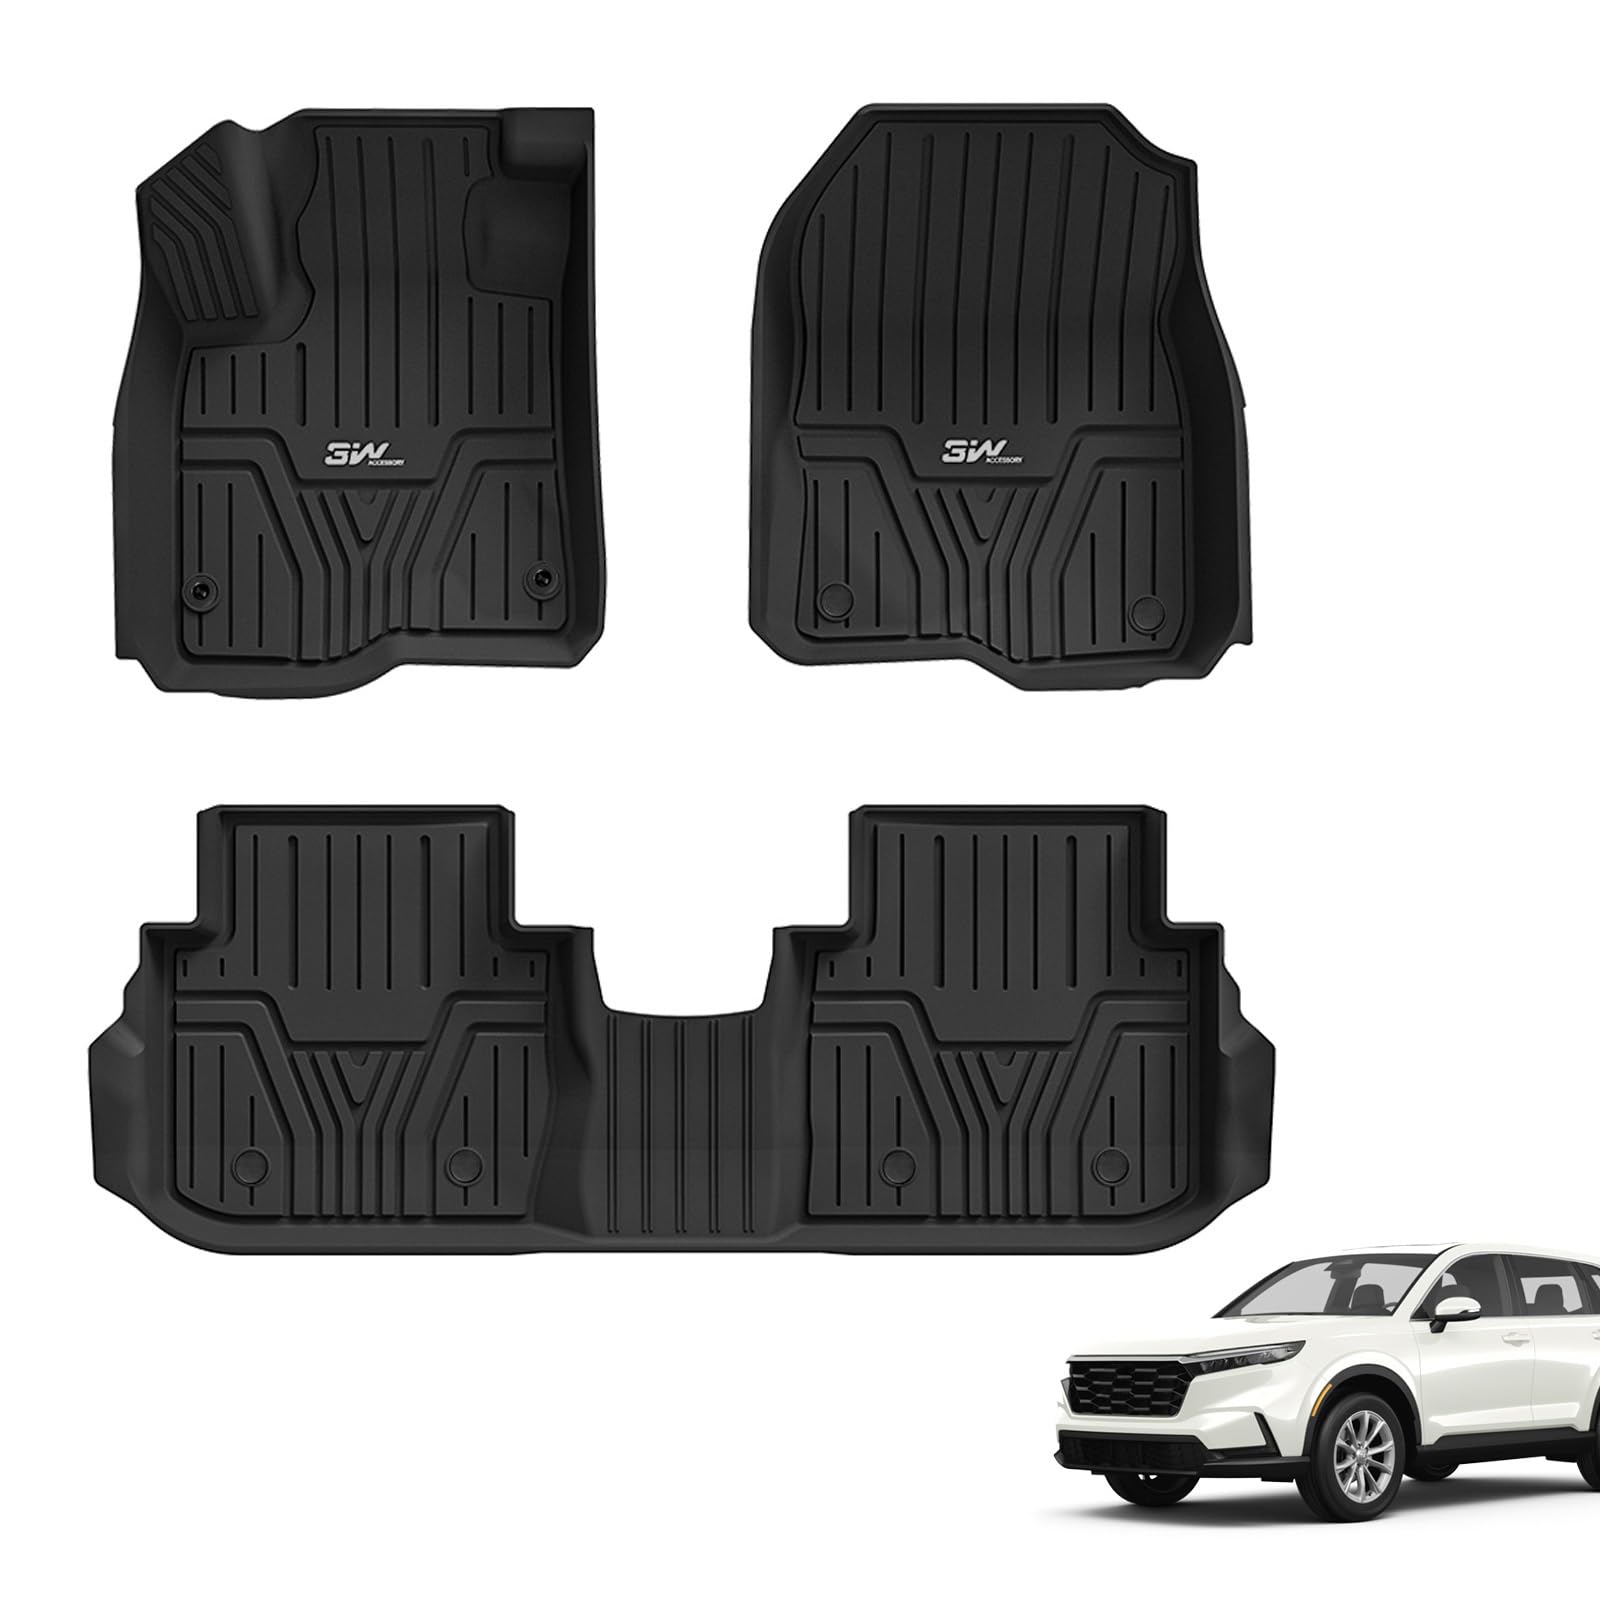 3W Honda CR-V 2023-2024 Custom Floor Mats(Include Hybrid) / Trunk Mat(Non Hybrid) CRV TPE Material & All-Weather Protection Vehicles & Parts 3Wliners 2023-2024 CR-V 2023-2024 1st&2nd Row Mats